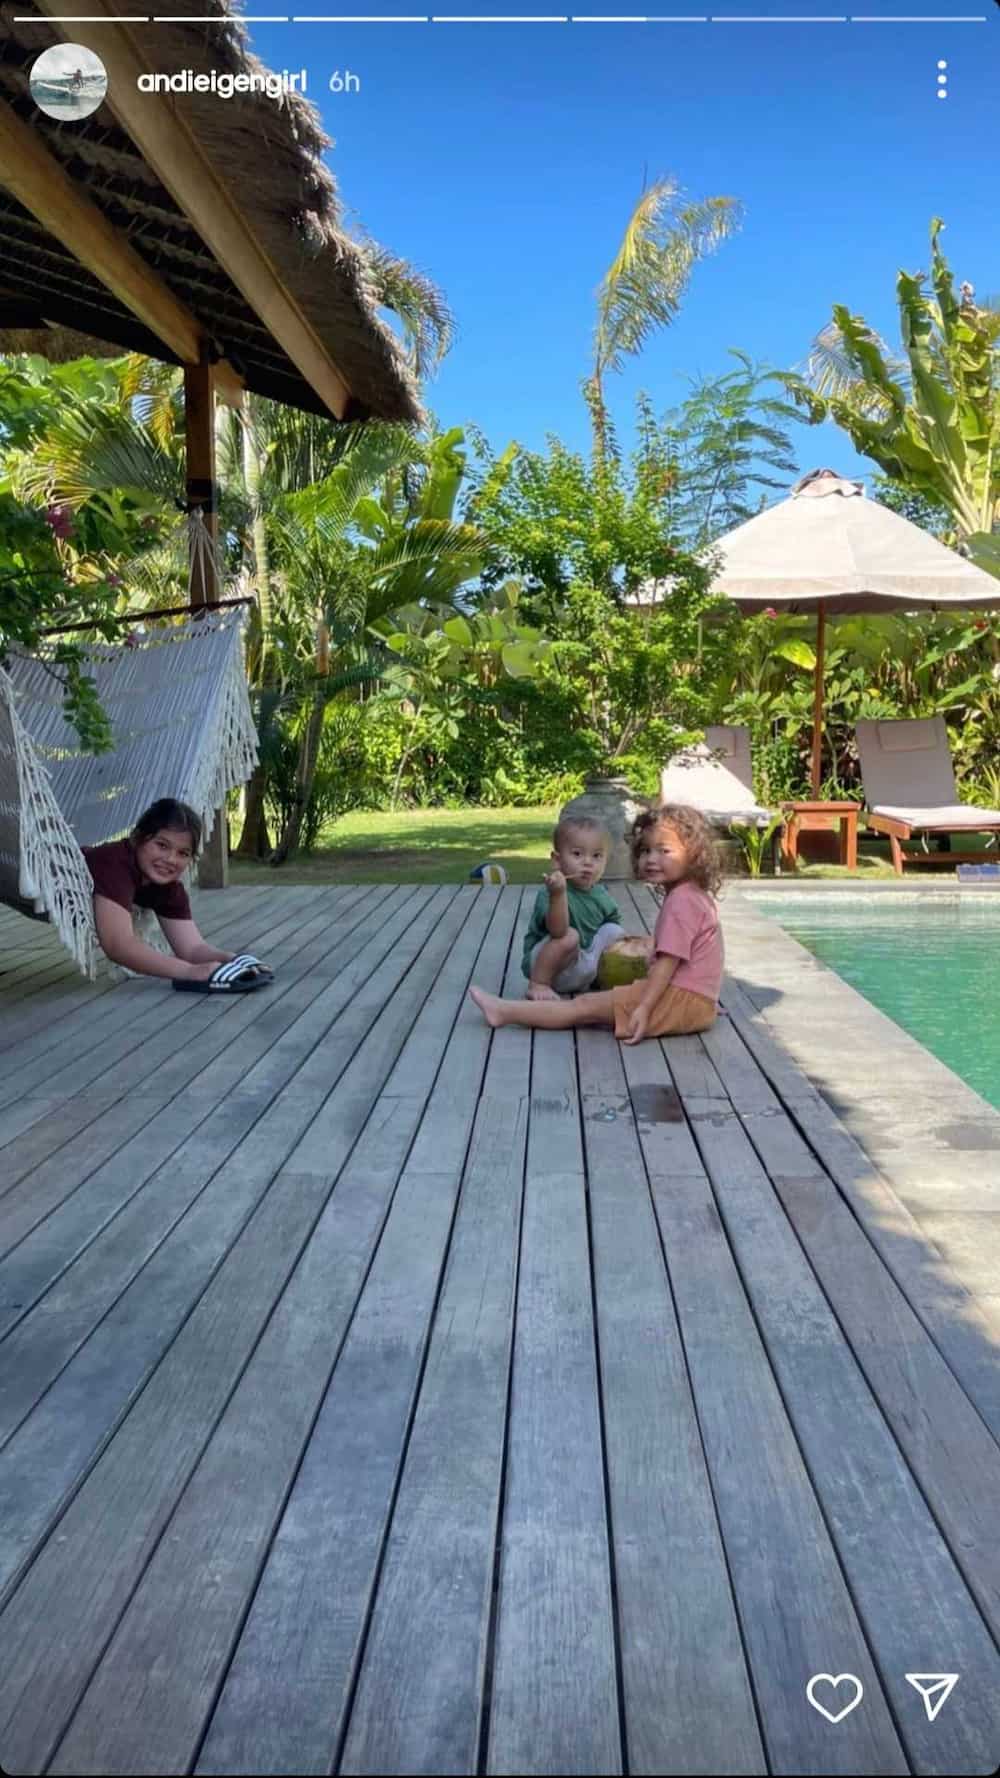 Andi Eigenmann travels to Indonesia with family; gives glimpse of their vacation